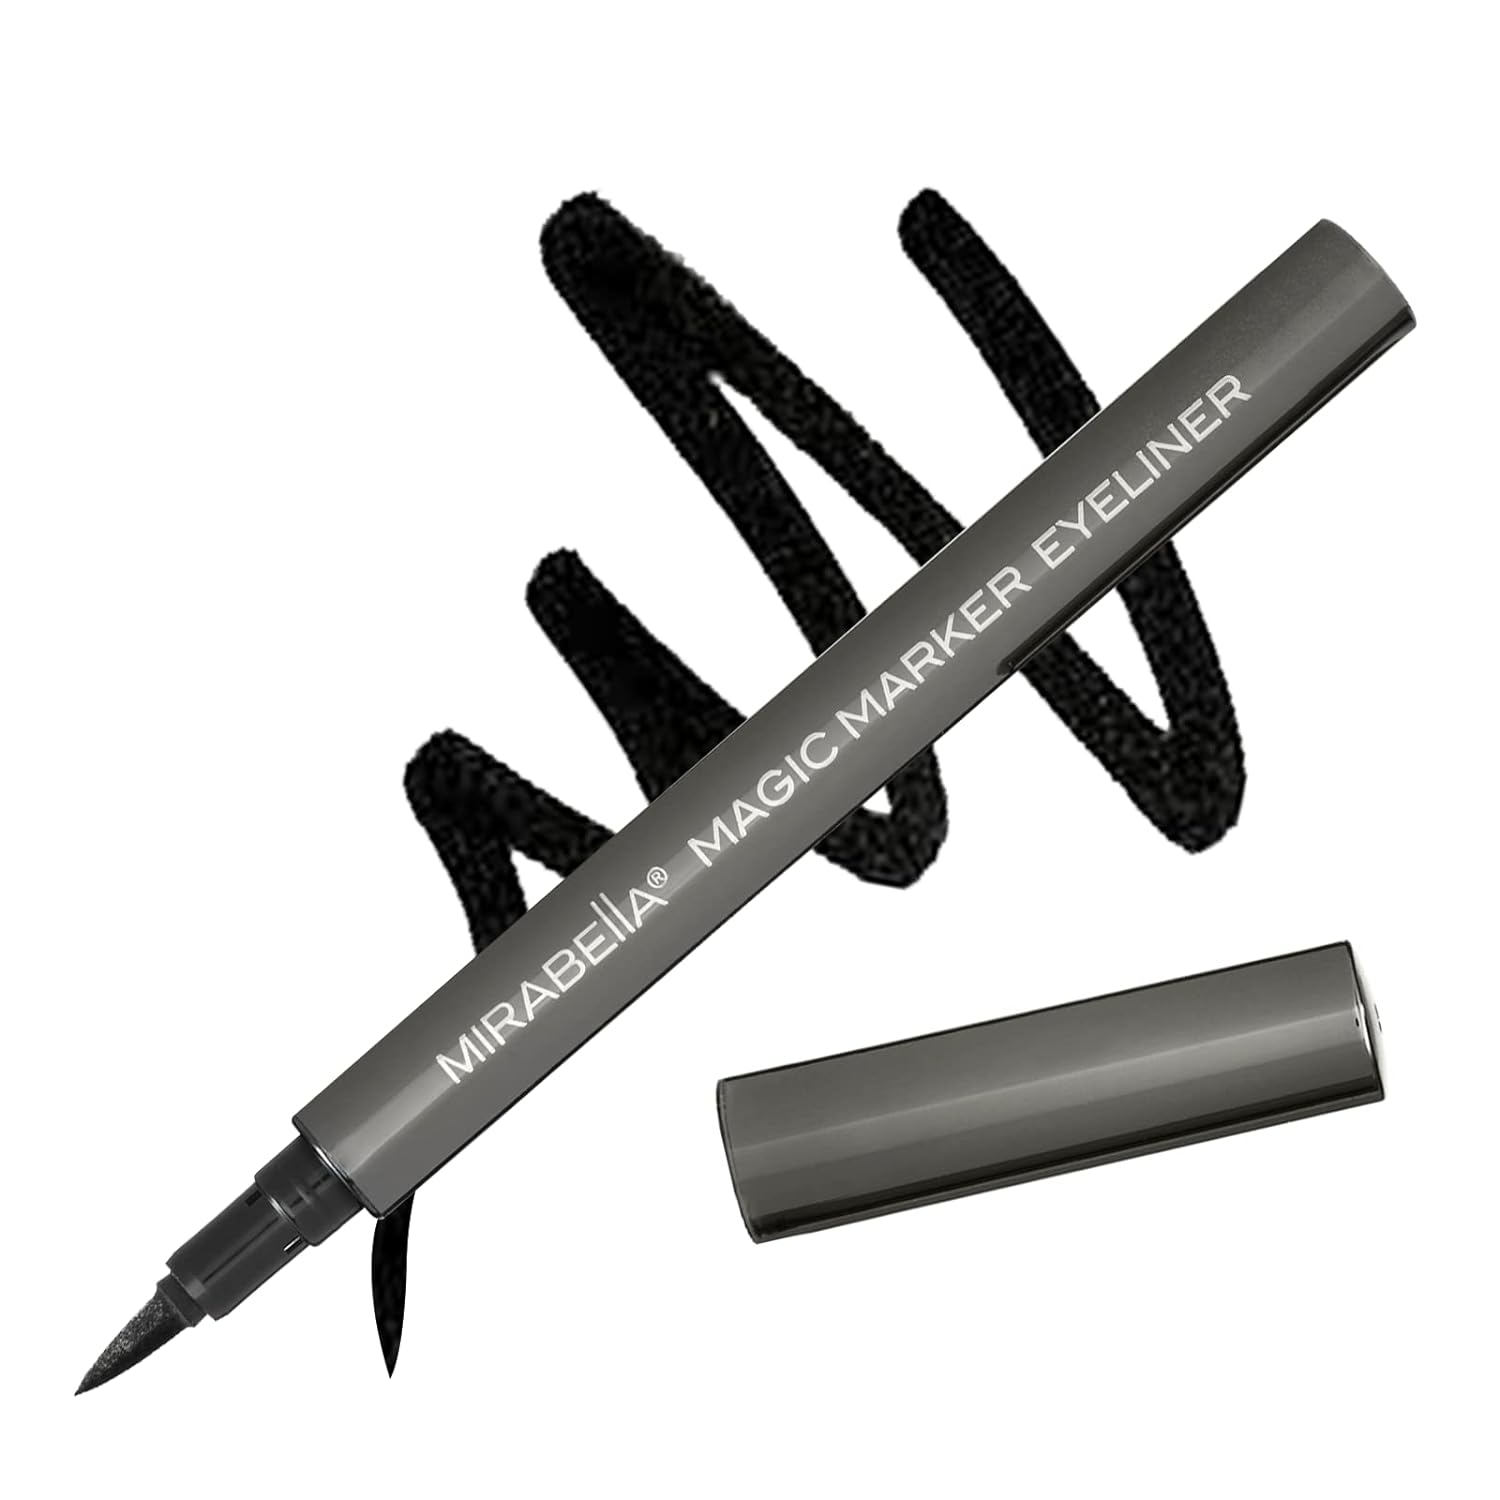 Mirabella Black Magic Marker Liquid Eyeliner - Perfect Brush-Tip for Precise and Controlled Application - Long-Lasting Liquid, Waterproof Color, Smudgeproof- No Tugging, Skipping, or aking